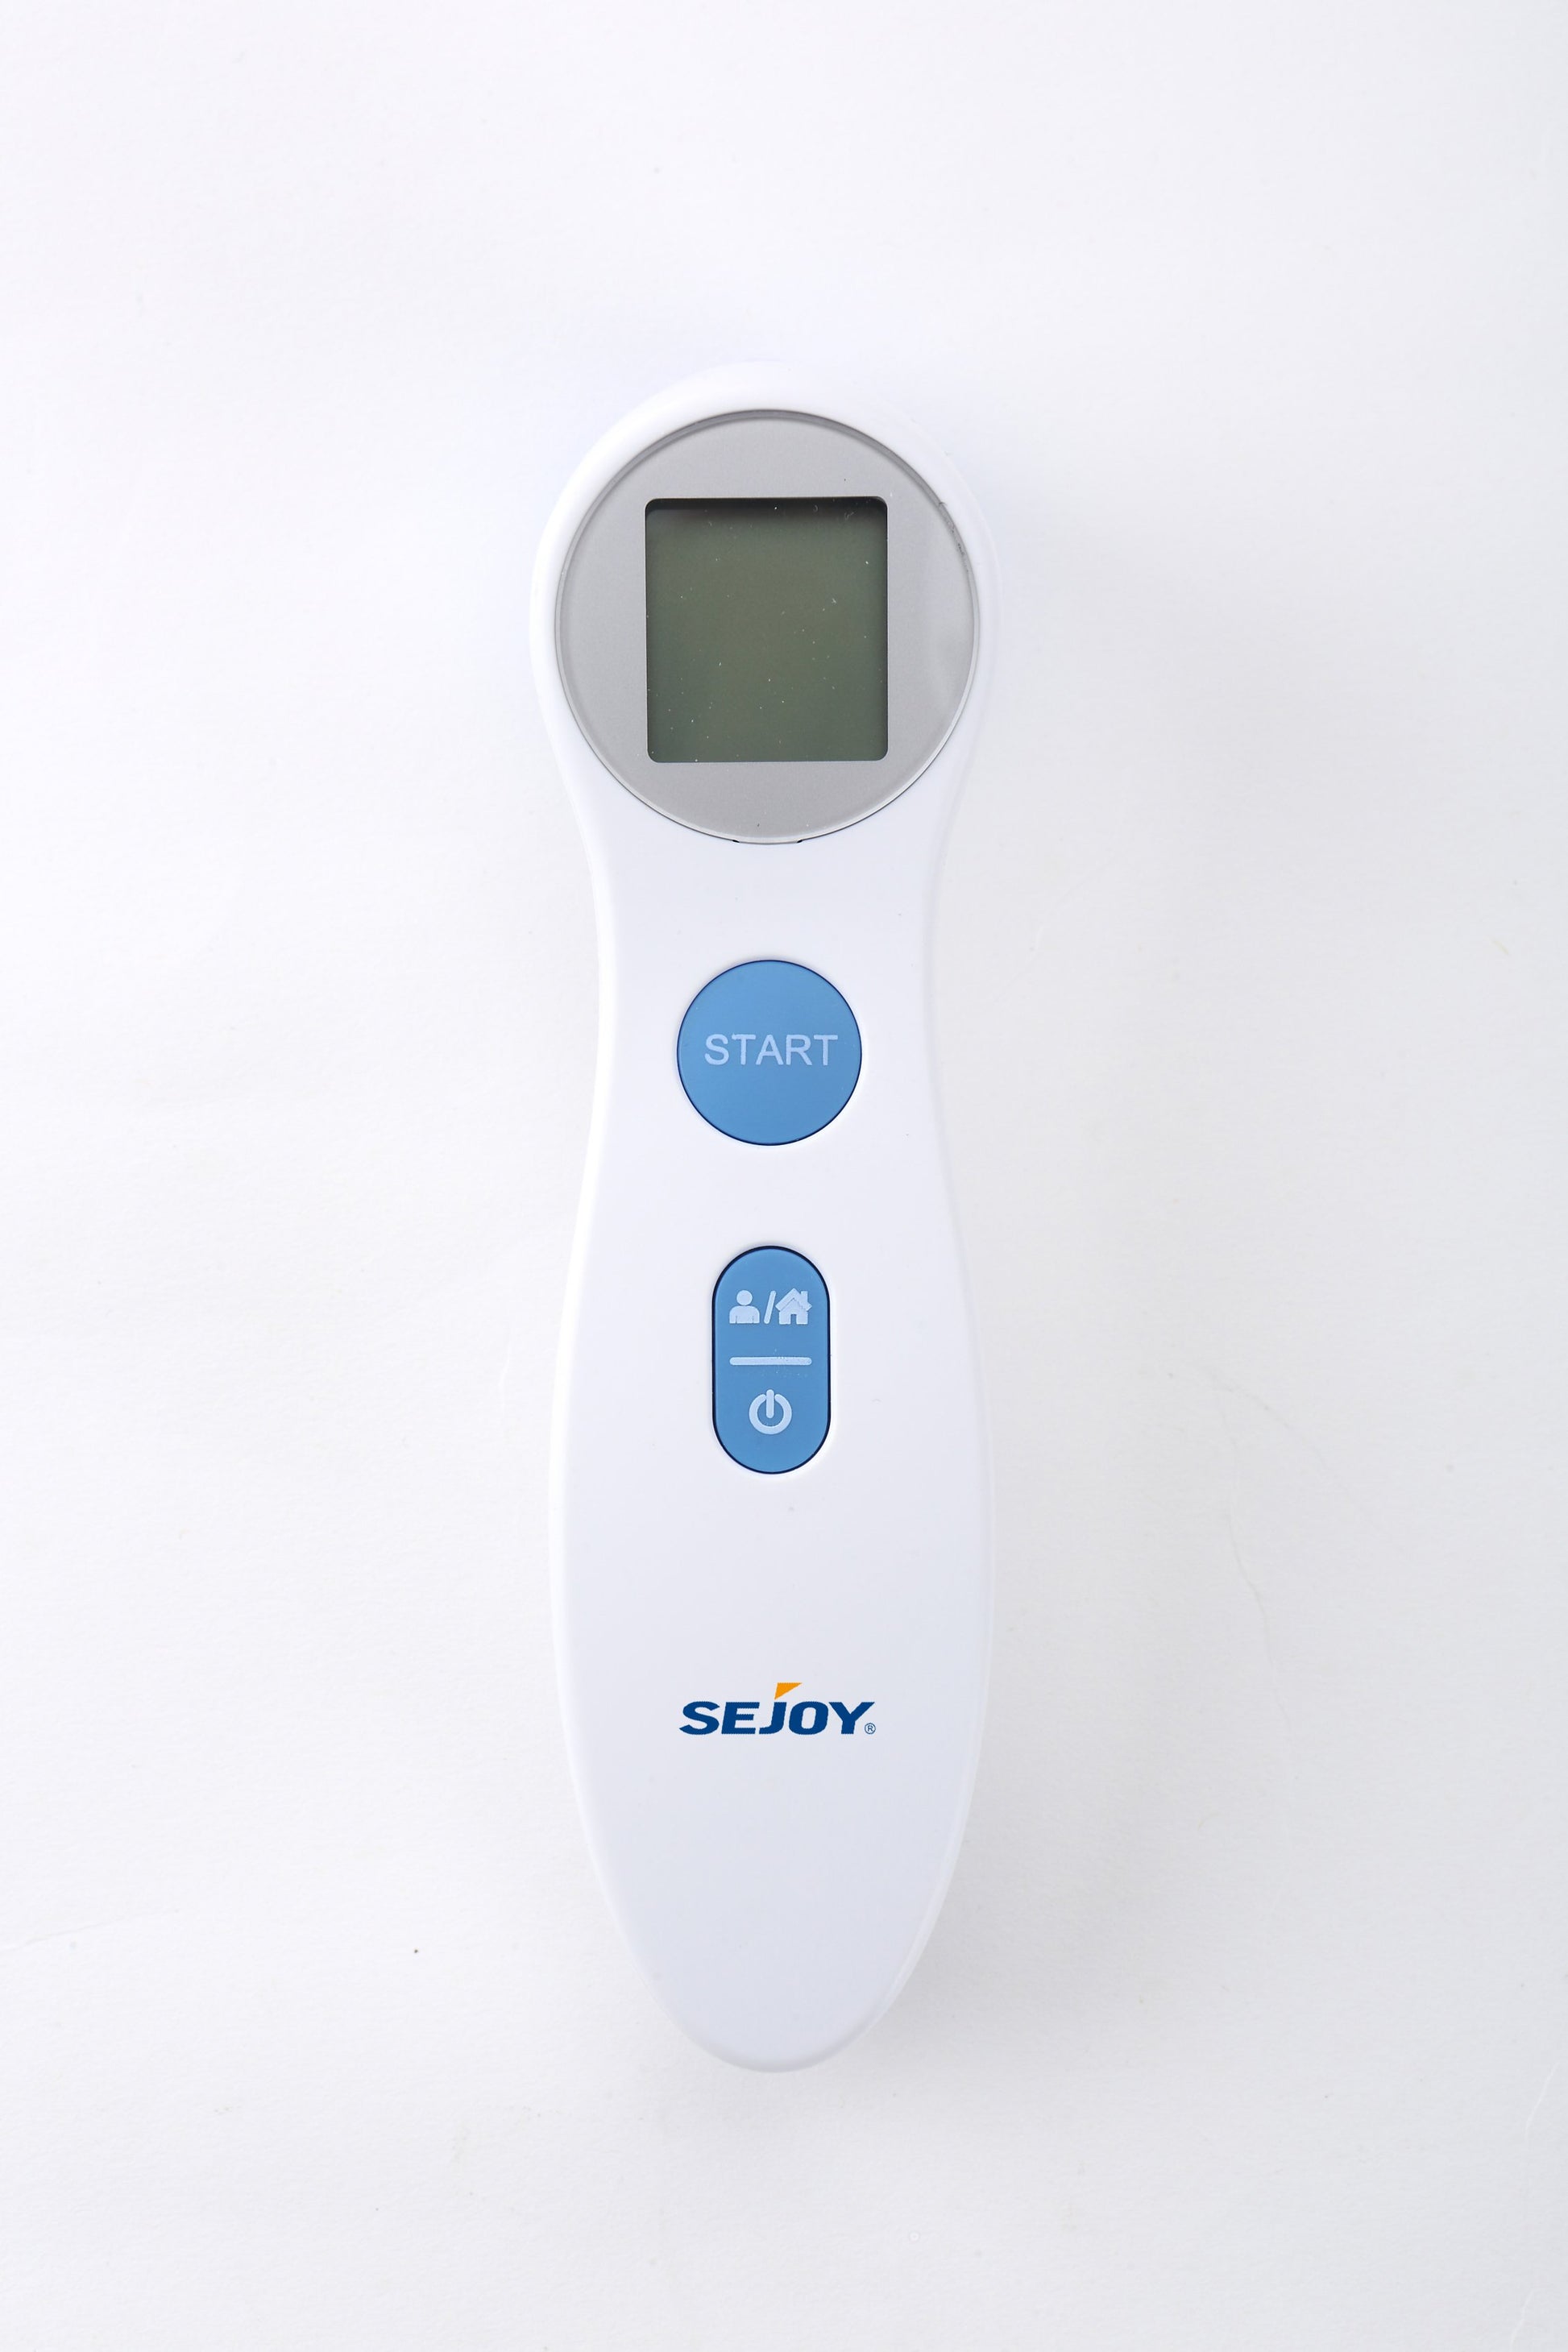 How to Use an Infrared Thermometer or Thermal Gun